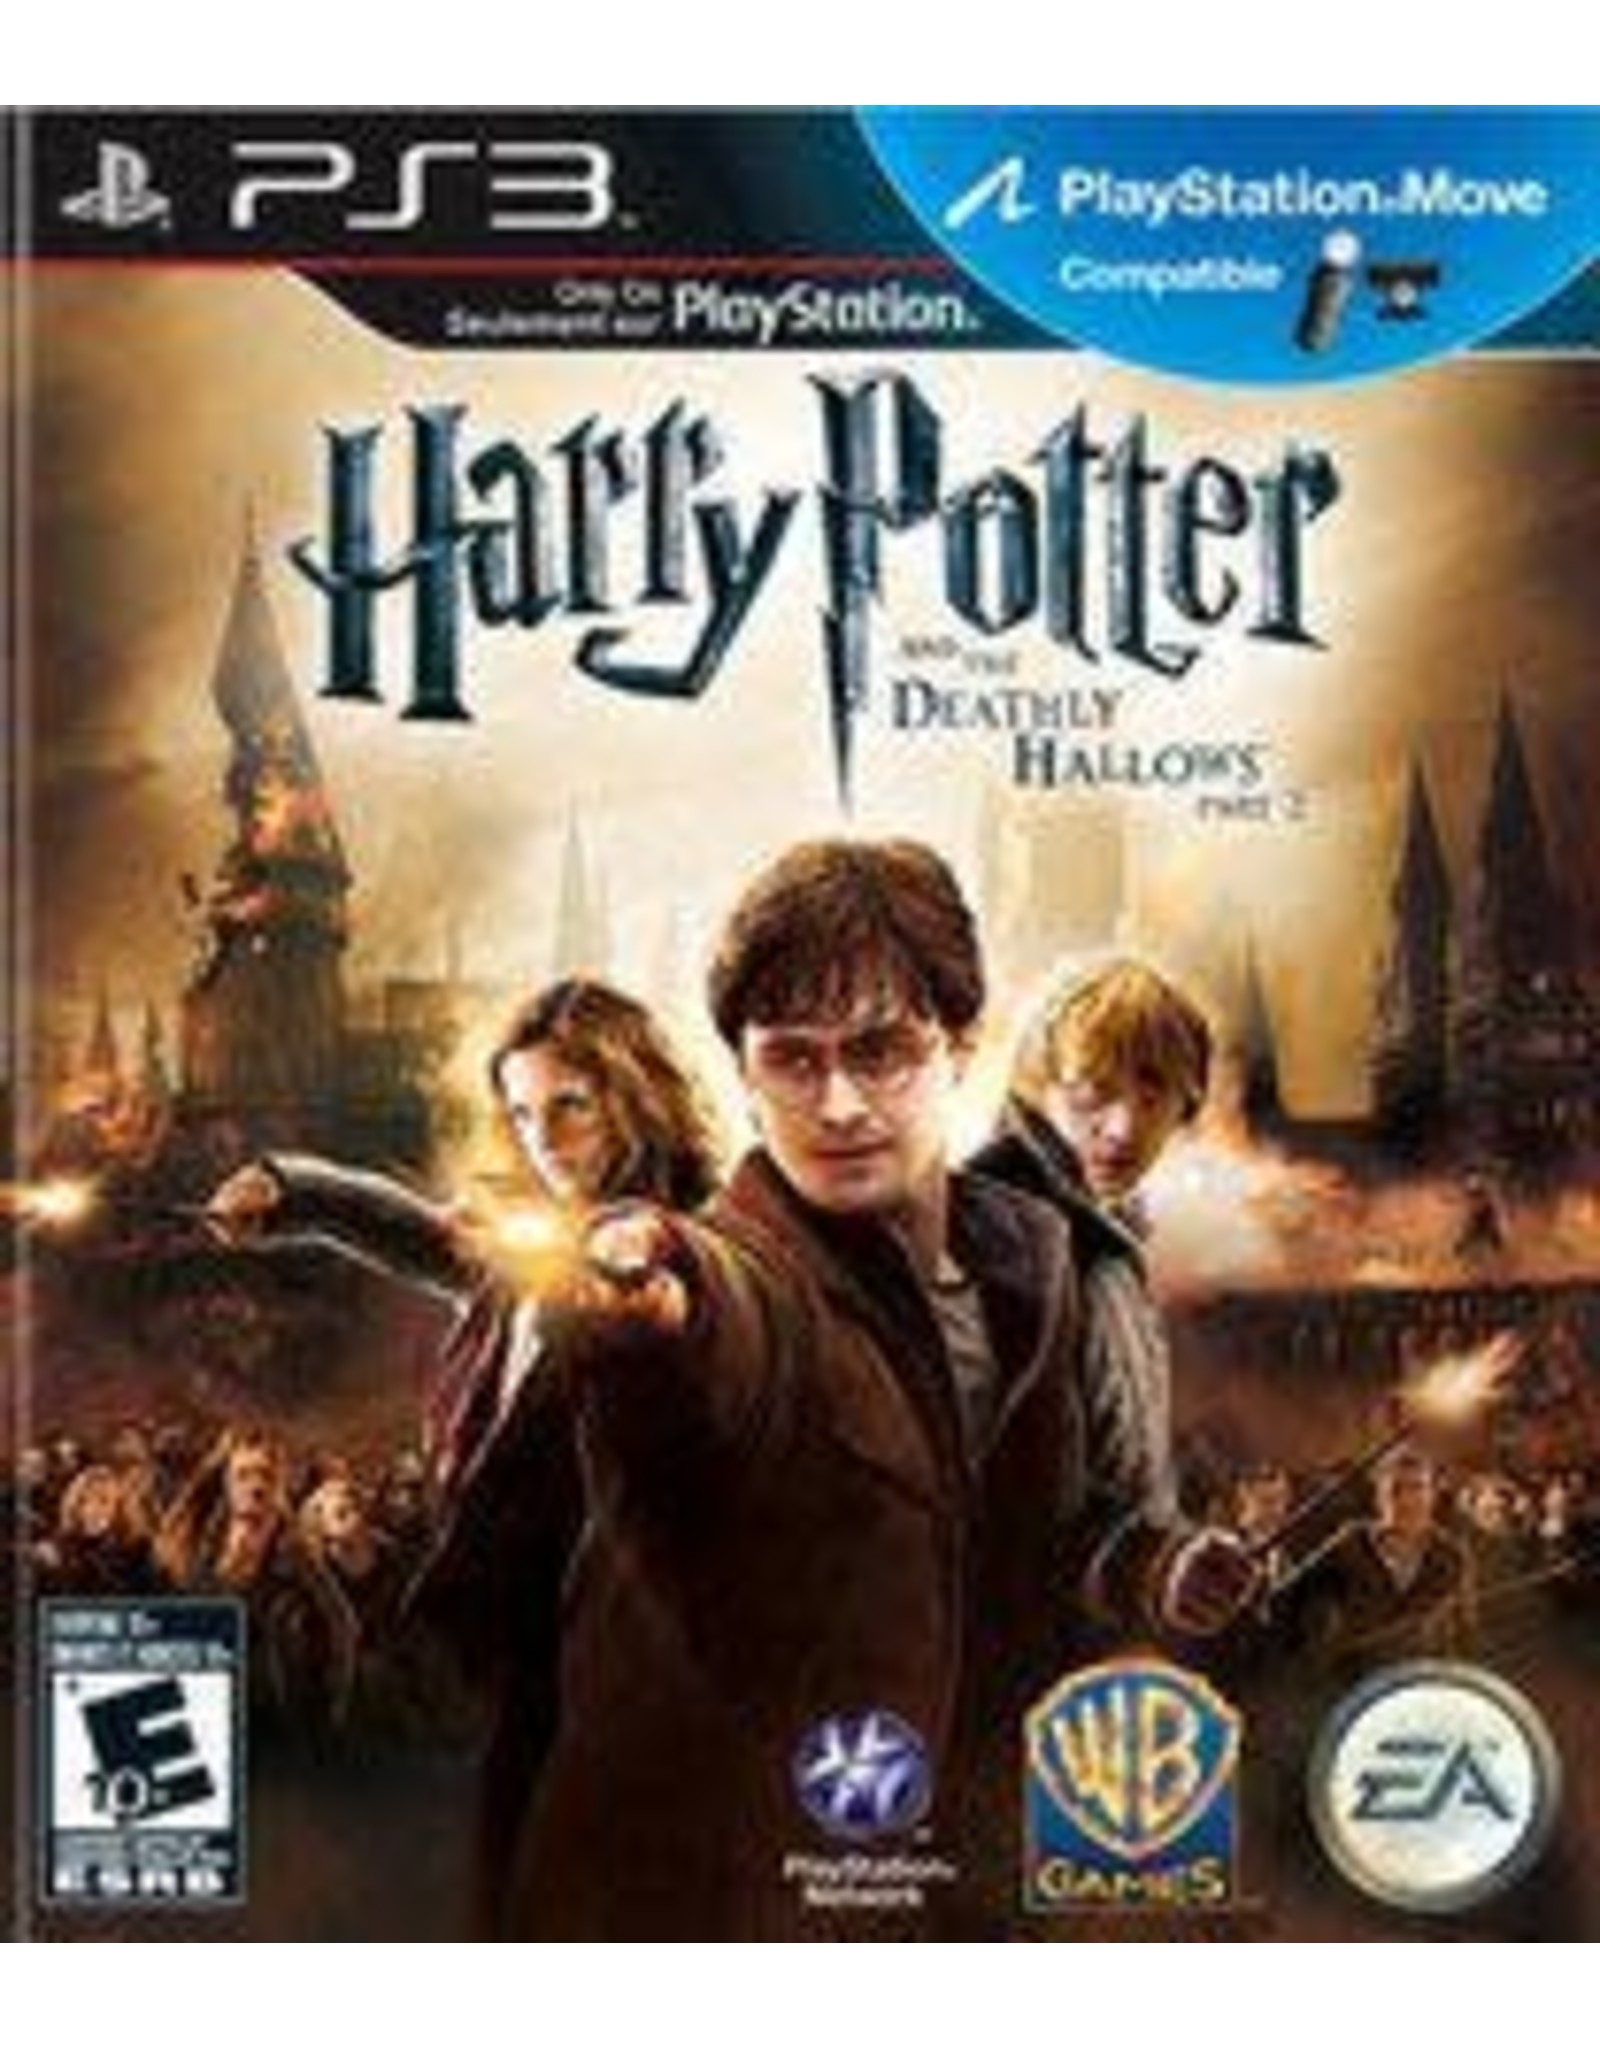 Playstation 3 Harry Potter and the Deathly Hallows: Part 2 (Brand New)